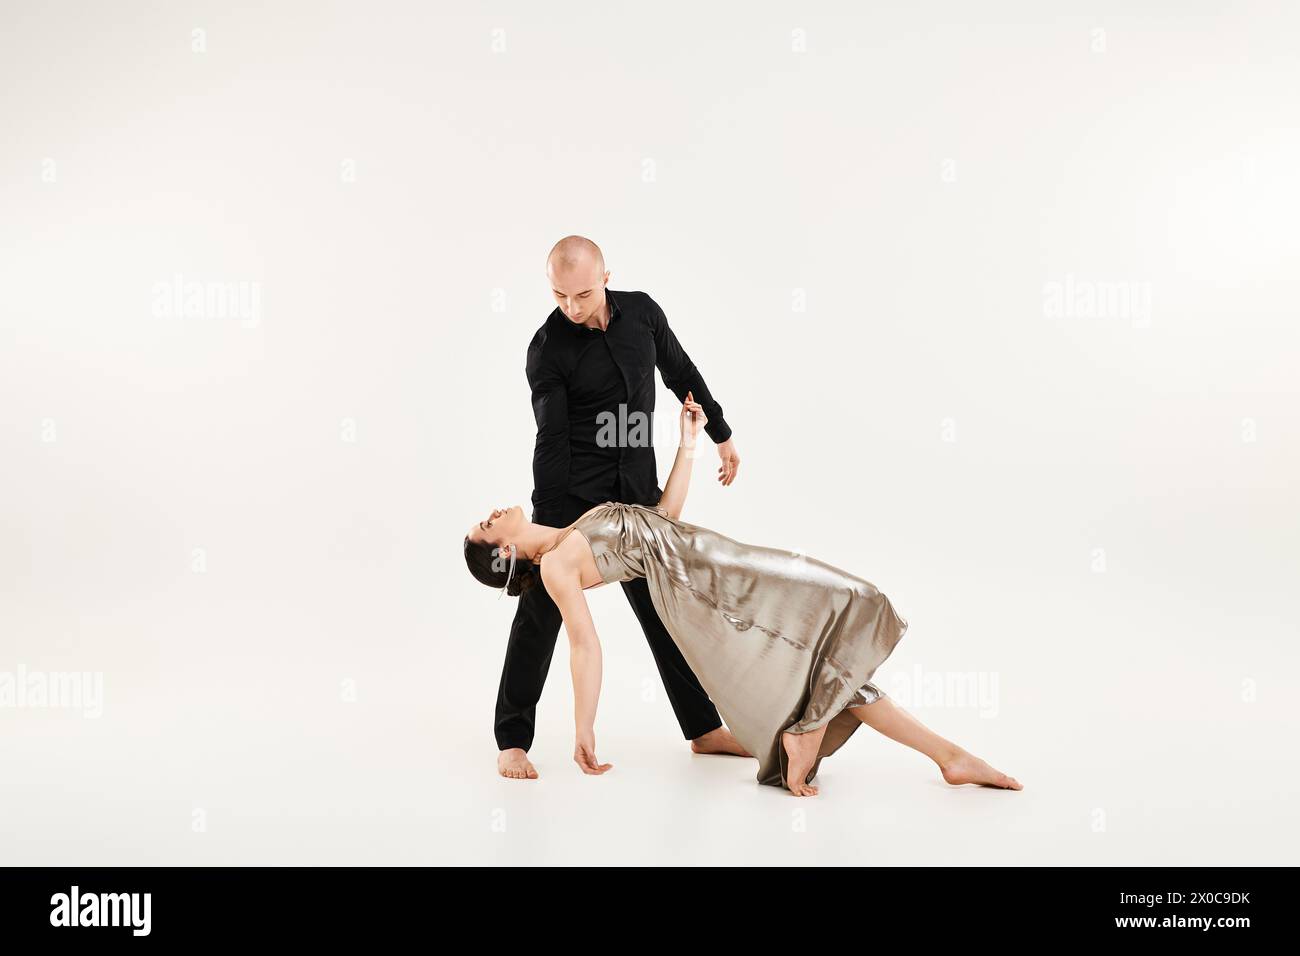 A young man in black and a young woman in a dress dance as a couple, incorporating acrobatic elements. Studio shot on a white background. Stock Photo